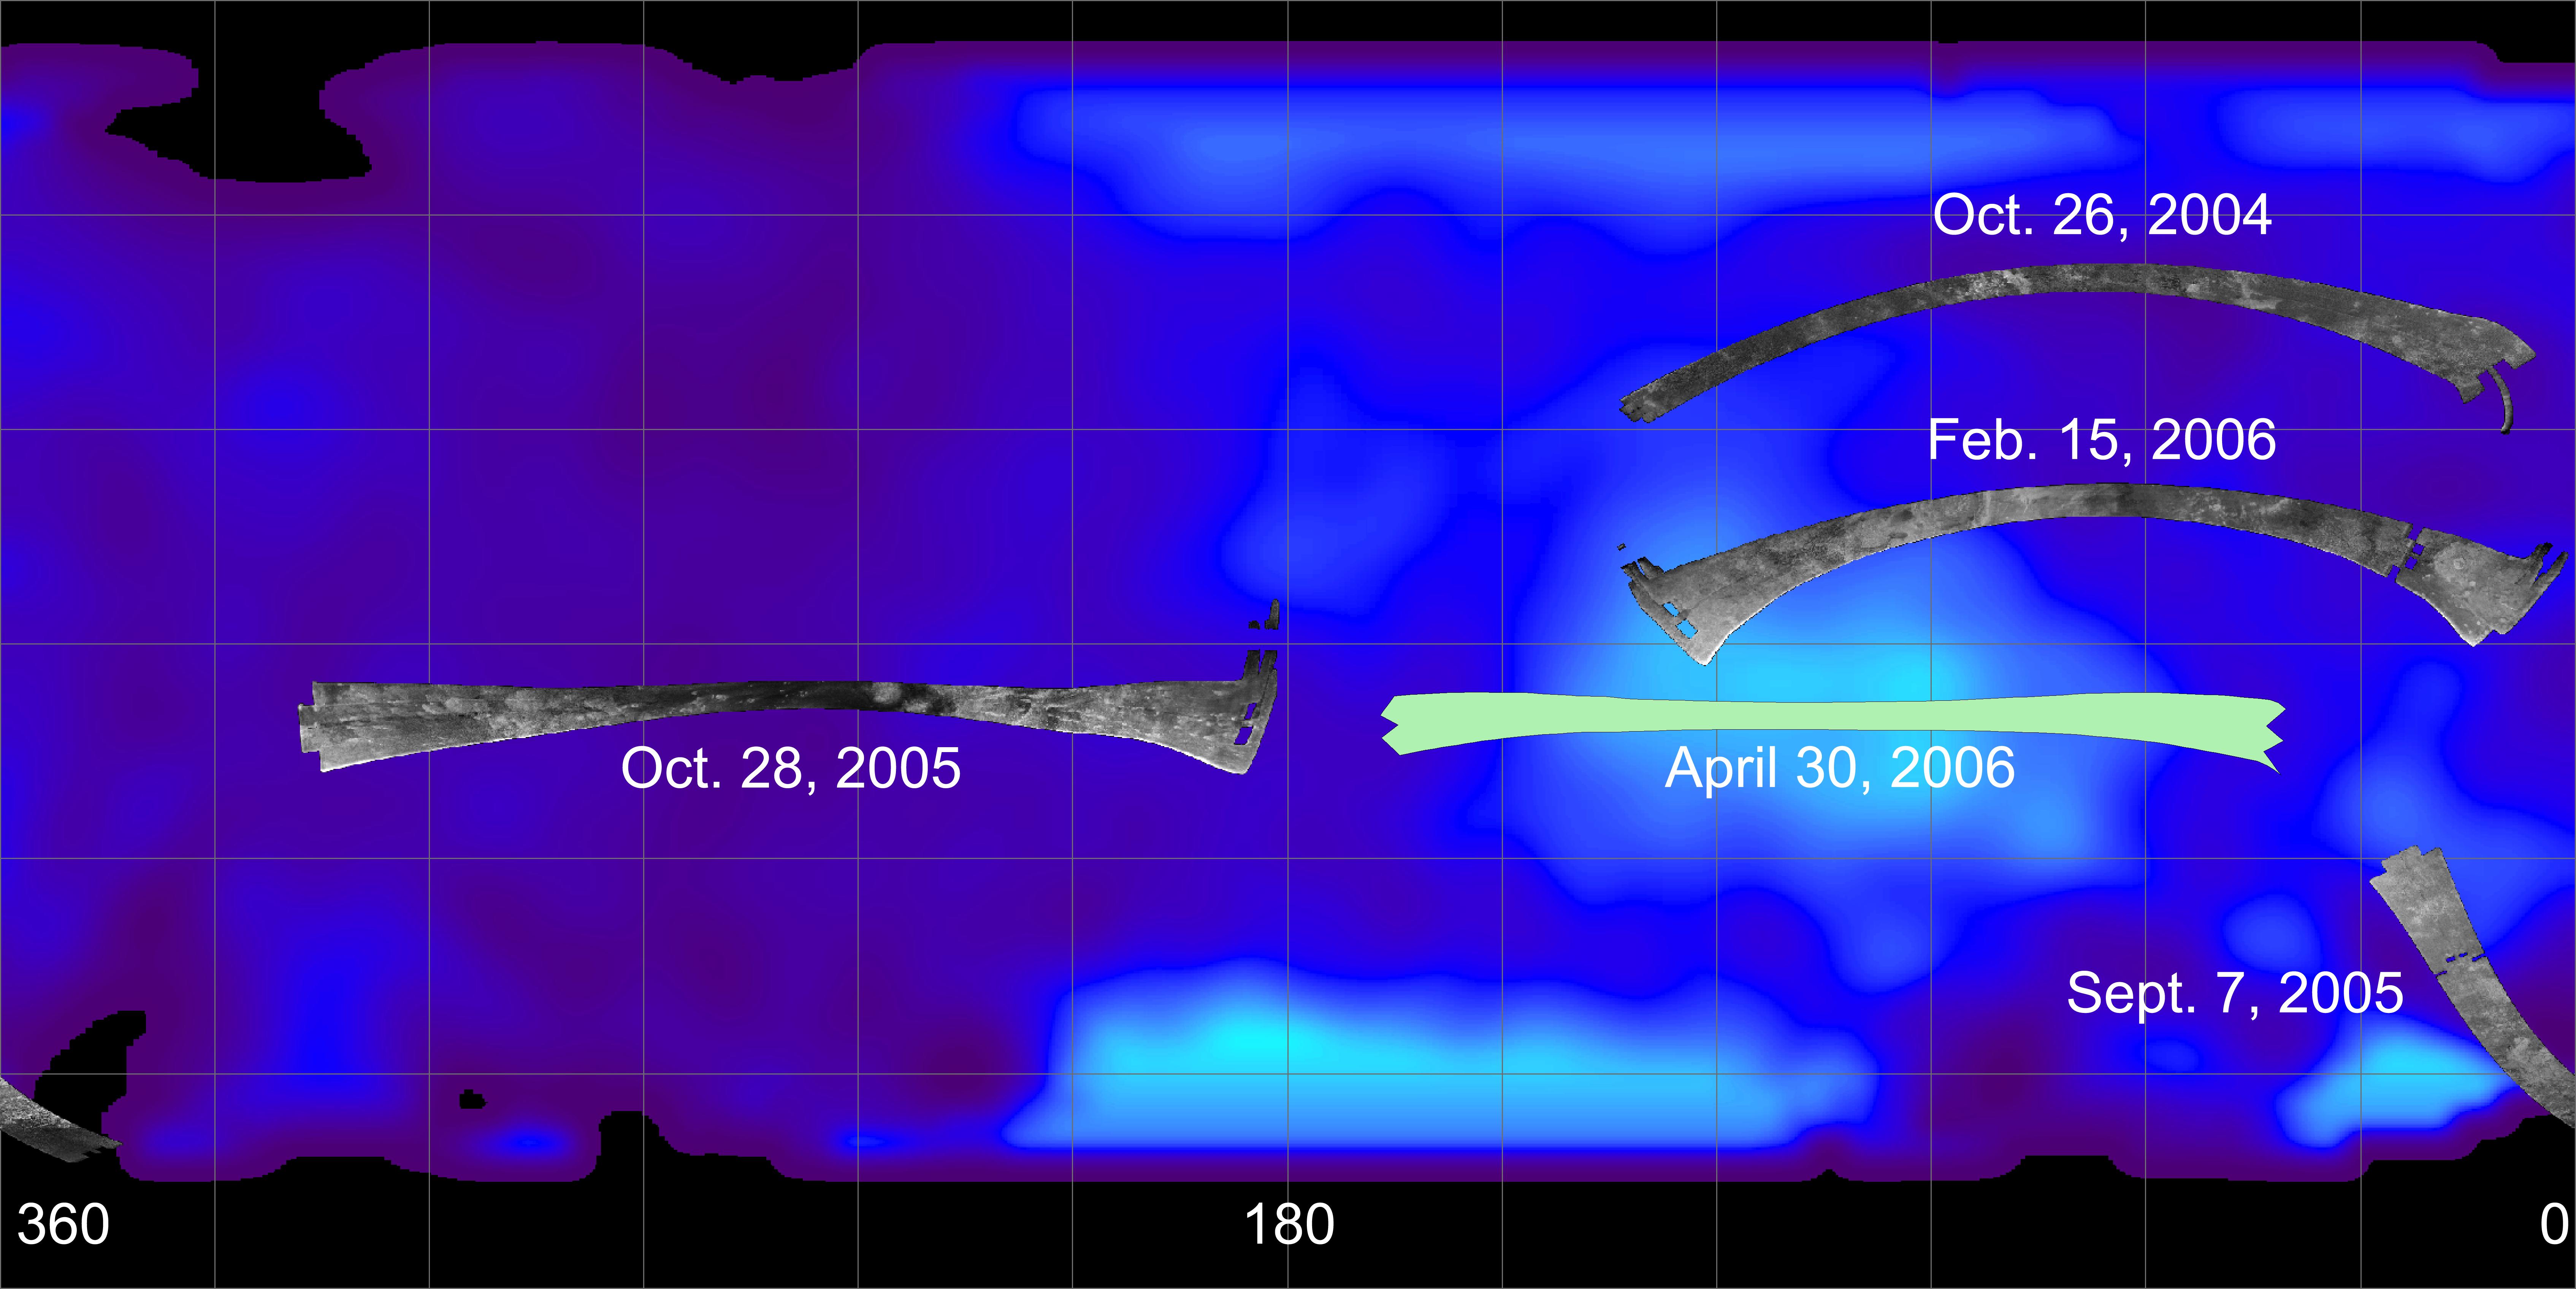 This annotated map shows the location of the upcoming April 30, 2006, Titan flyby and the areas mapped so far by Cassini